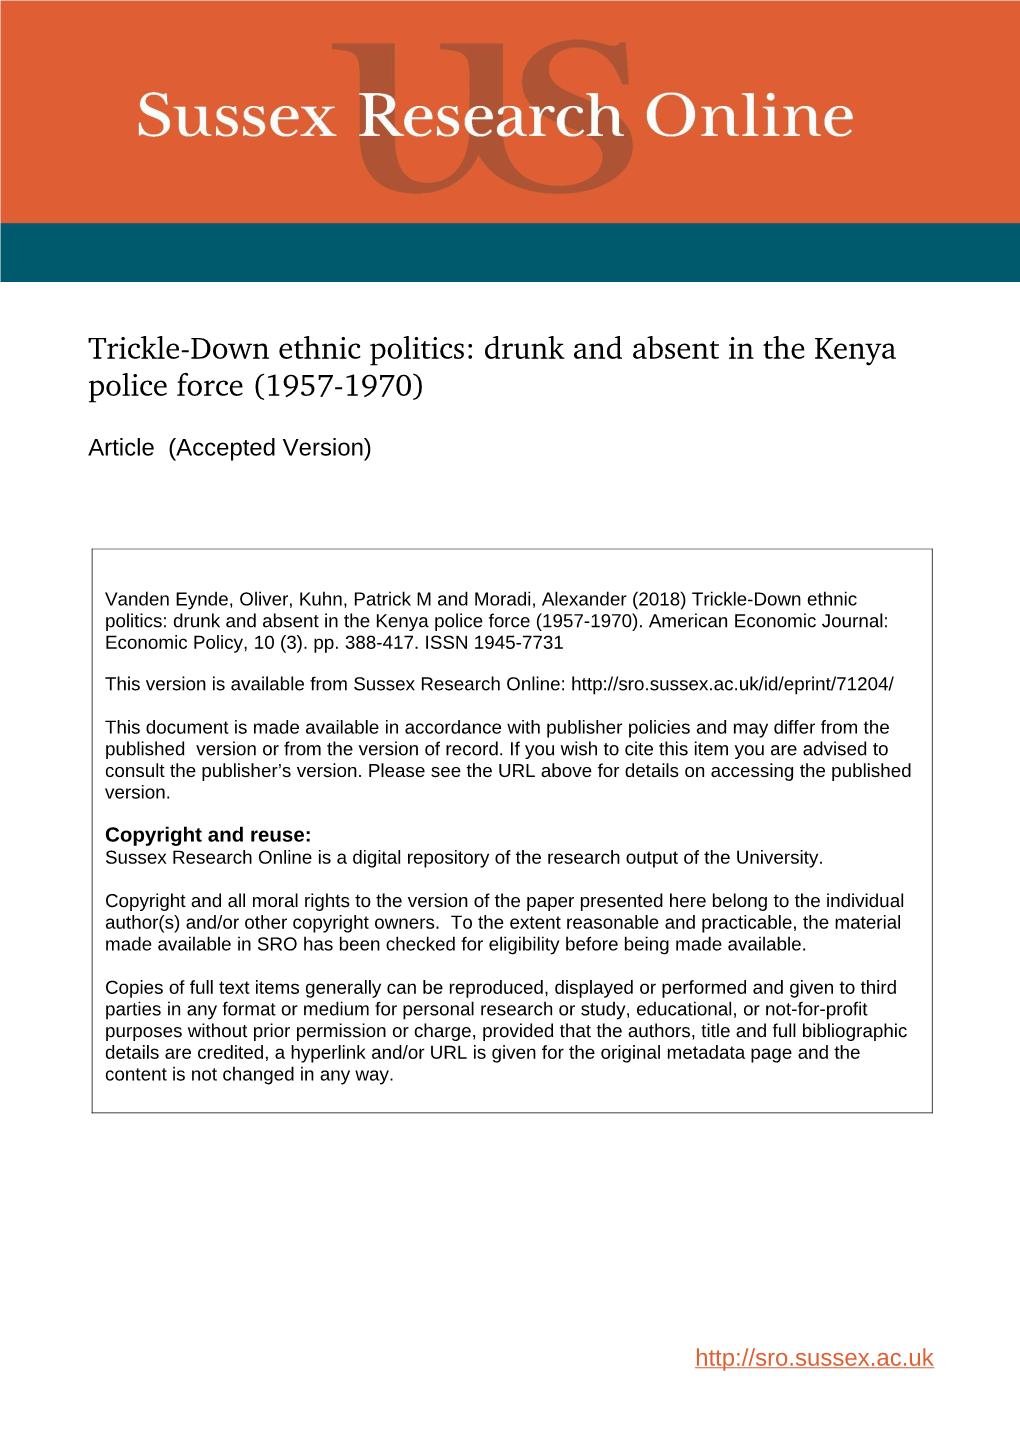 Trickledown Ethnic Politics: Drunk and Absent in the Kenya Police Force